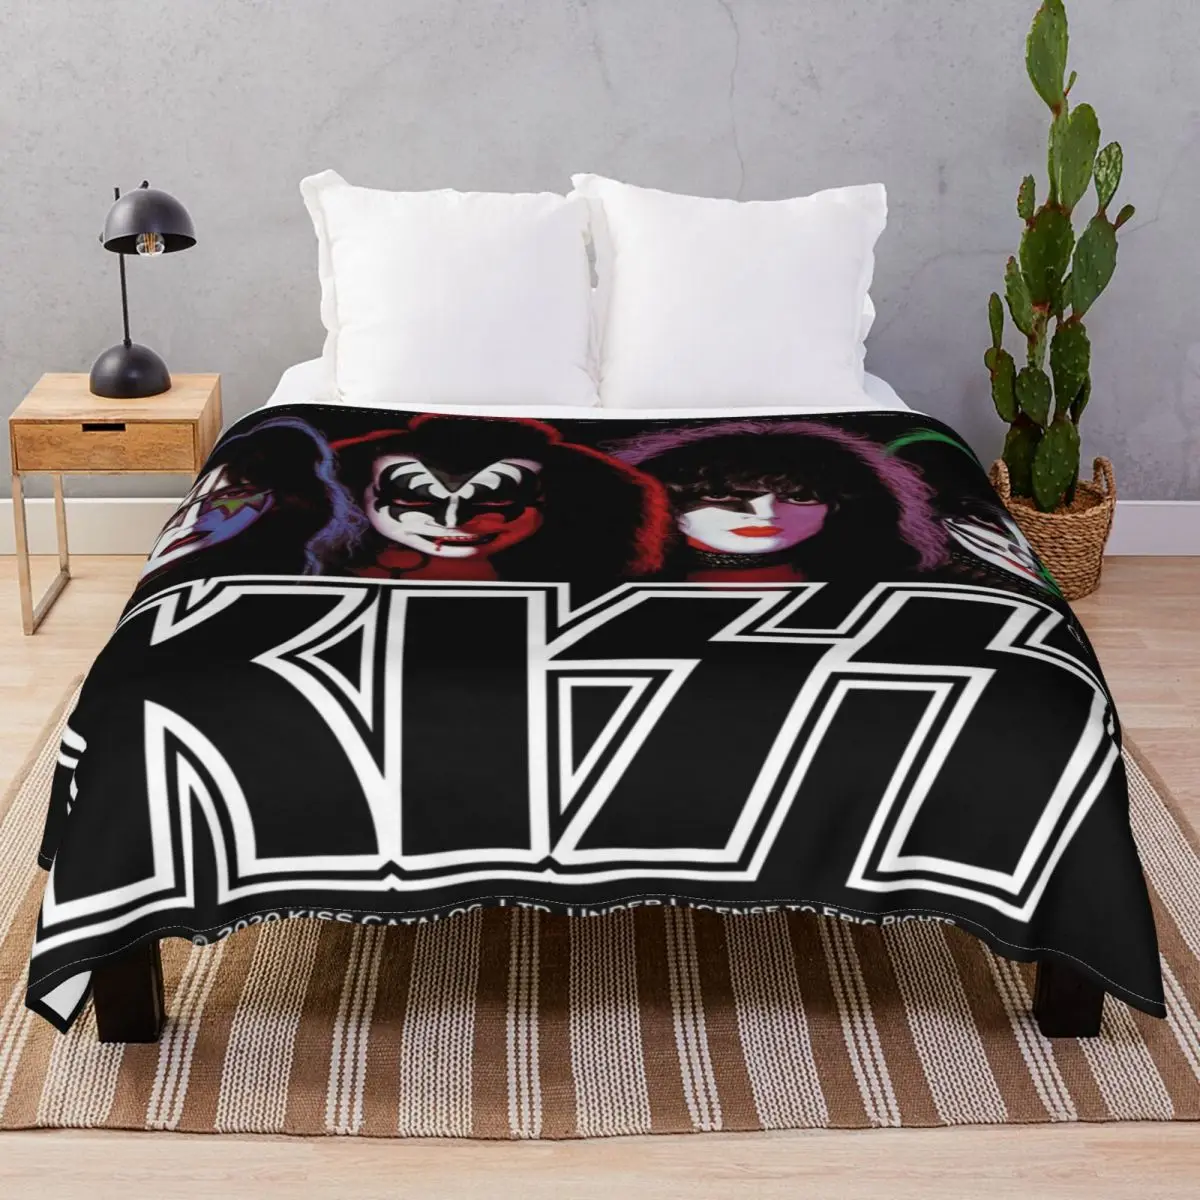 Four Faces KISS Blankets Fleece Autumn Lightweight Unisex Throw Blanket for Bedding Home Couch Camp Office